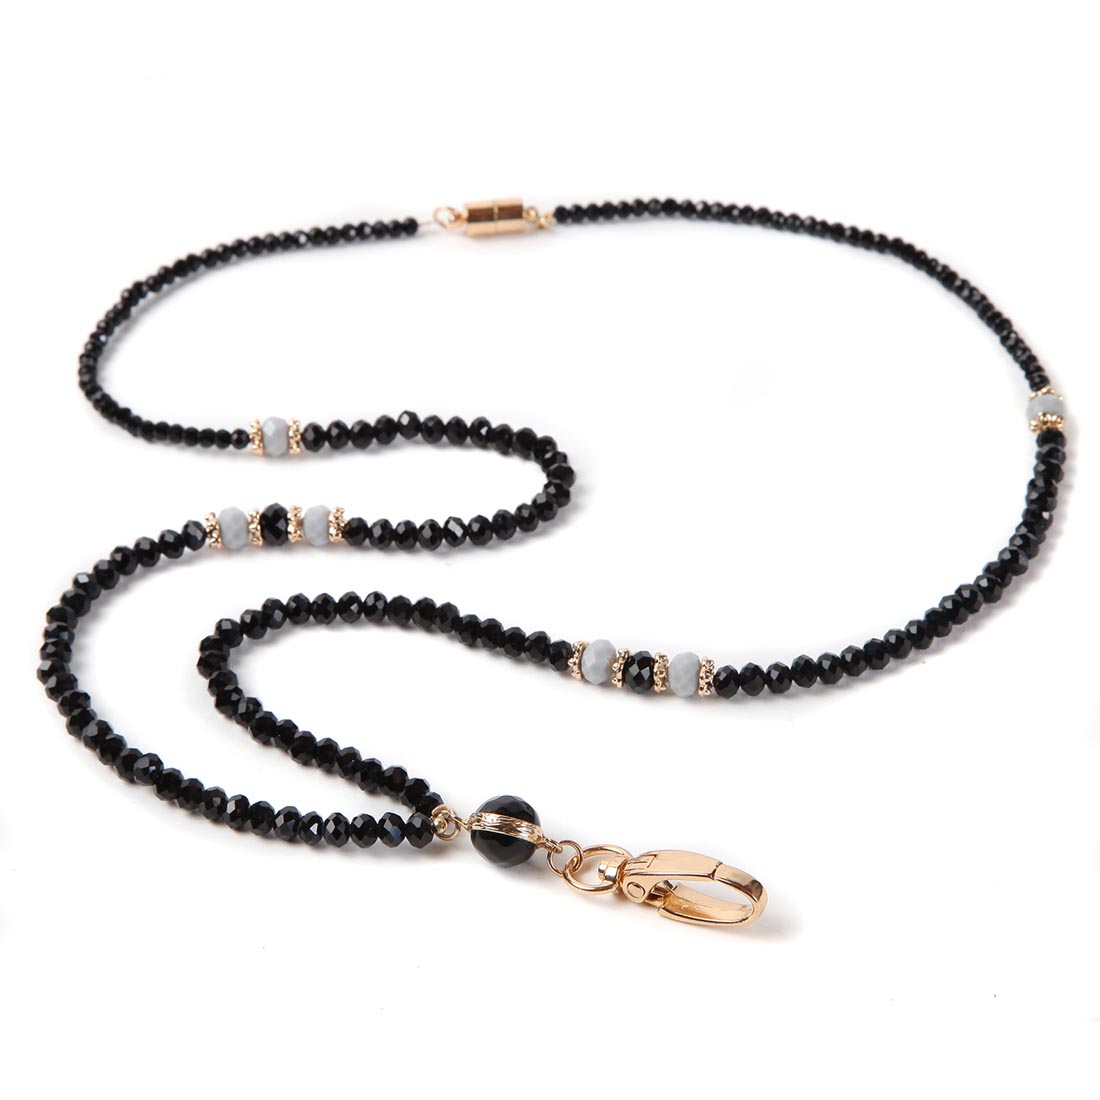 Gold Clip Lanyard with Black, Gray and Gold Beads